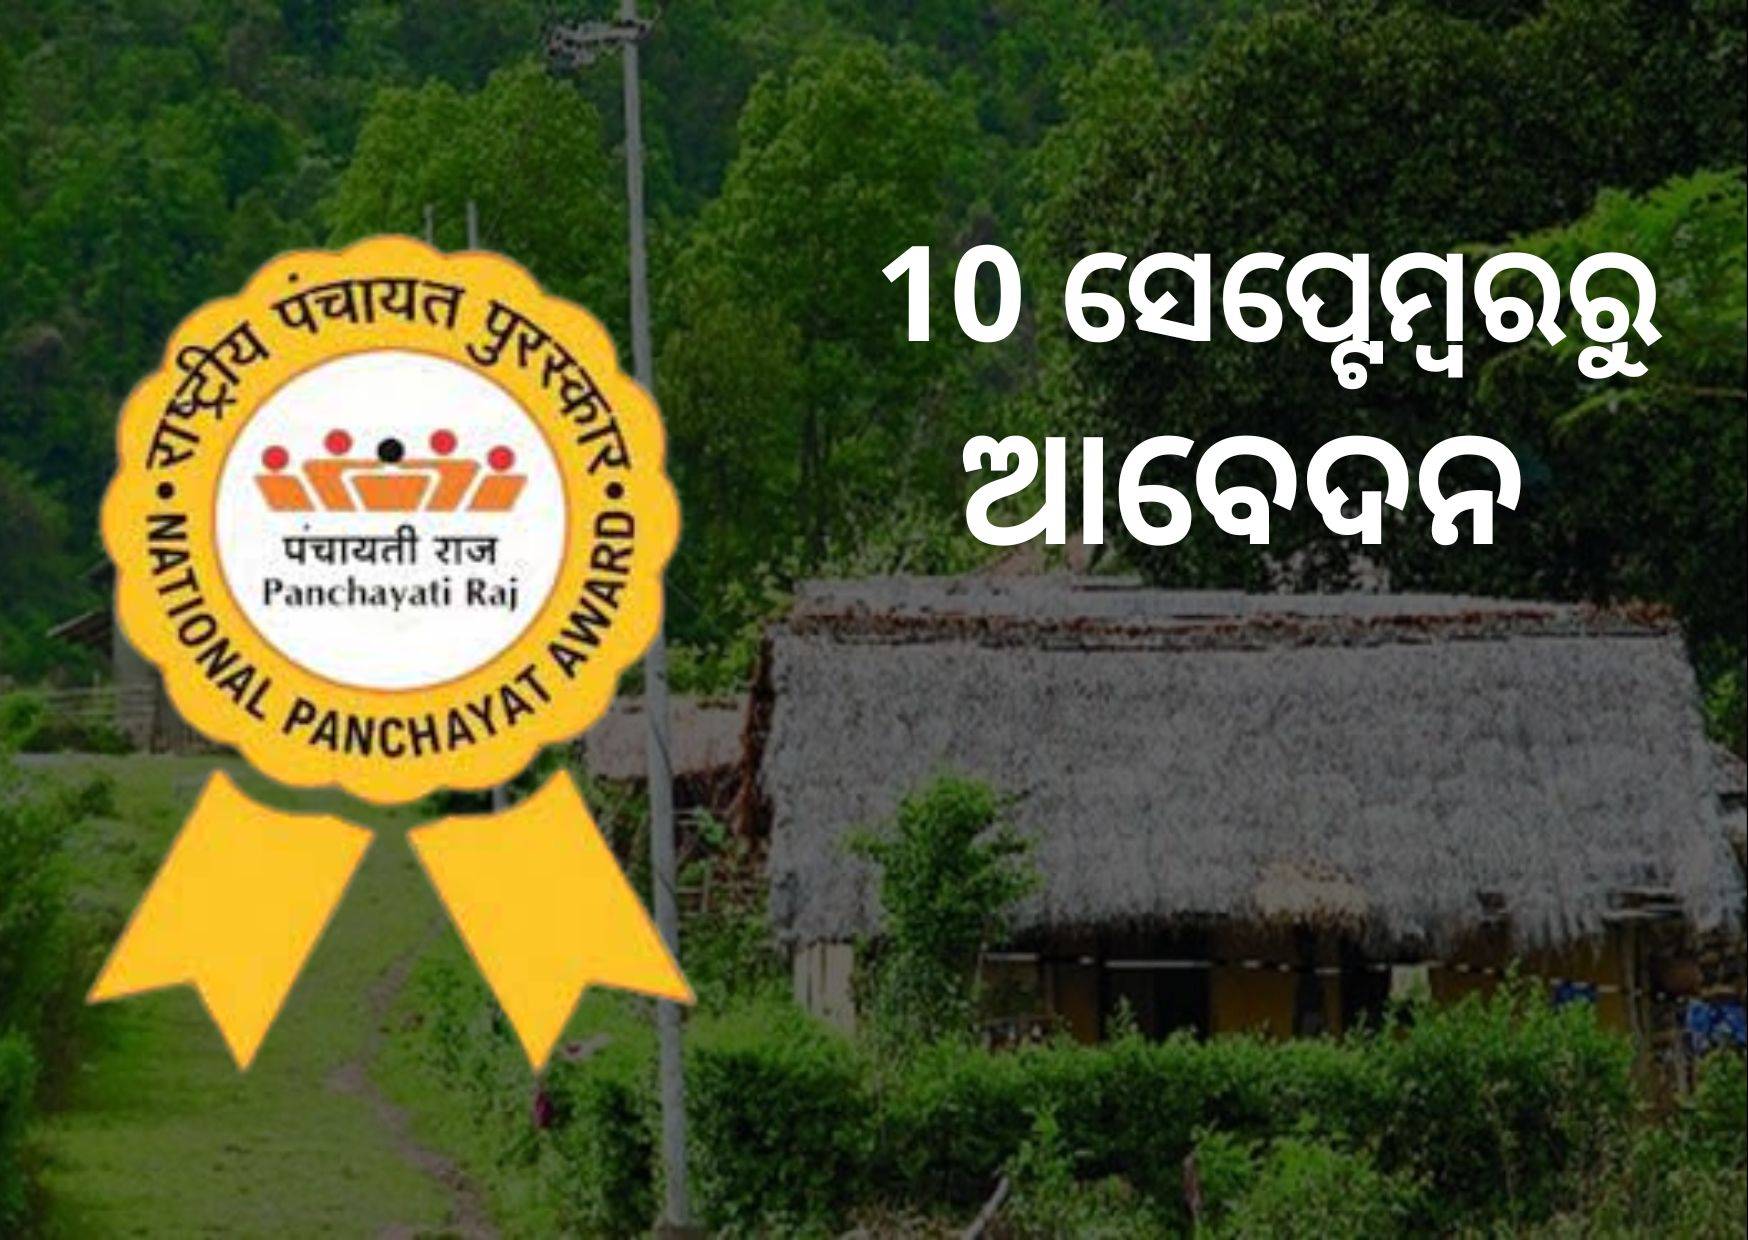 Entries for National Panchayat Awards will commence from 10th September